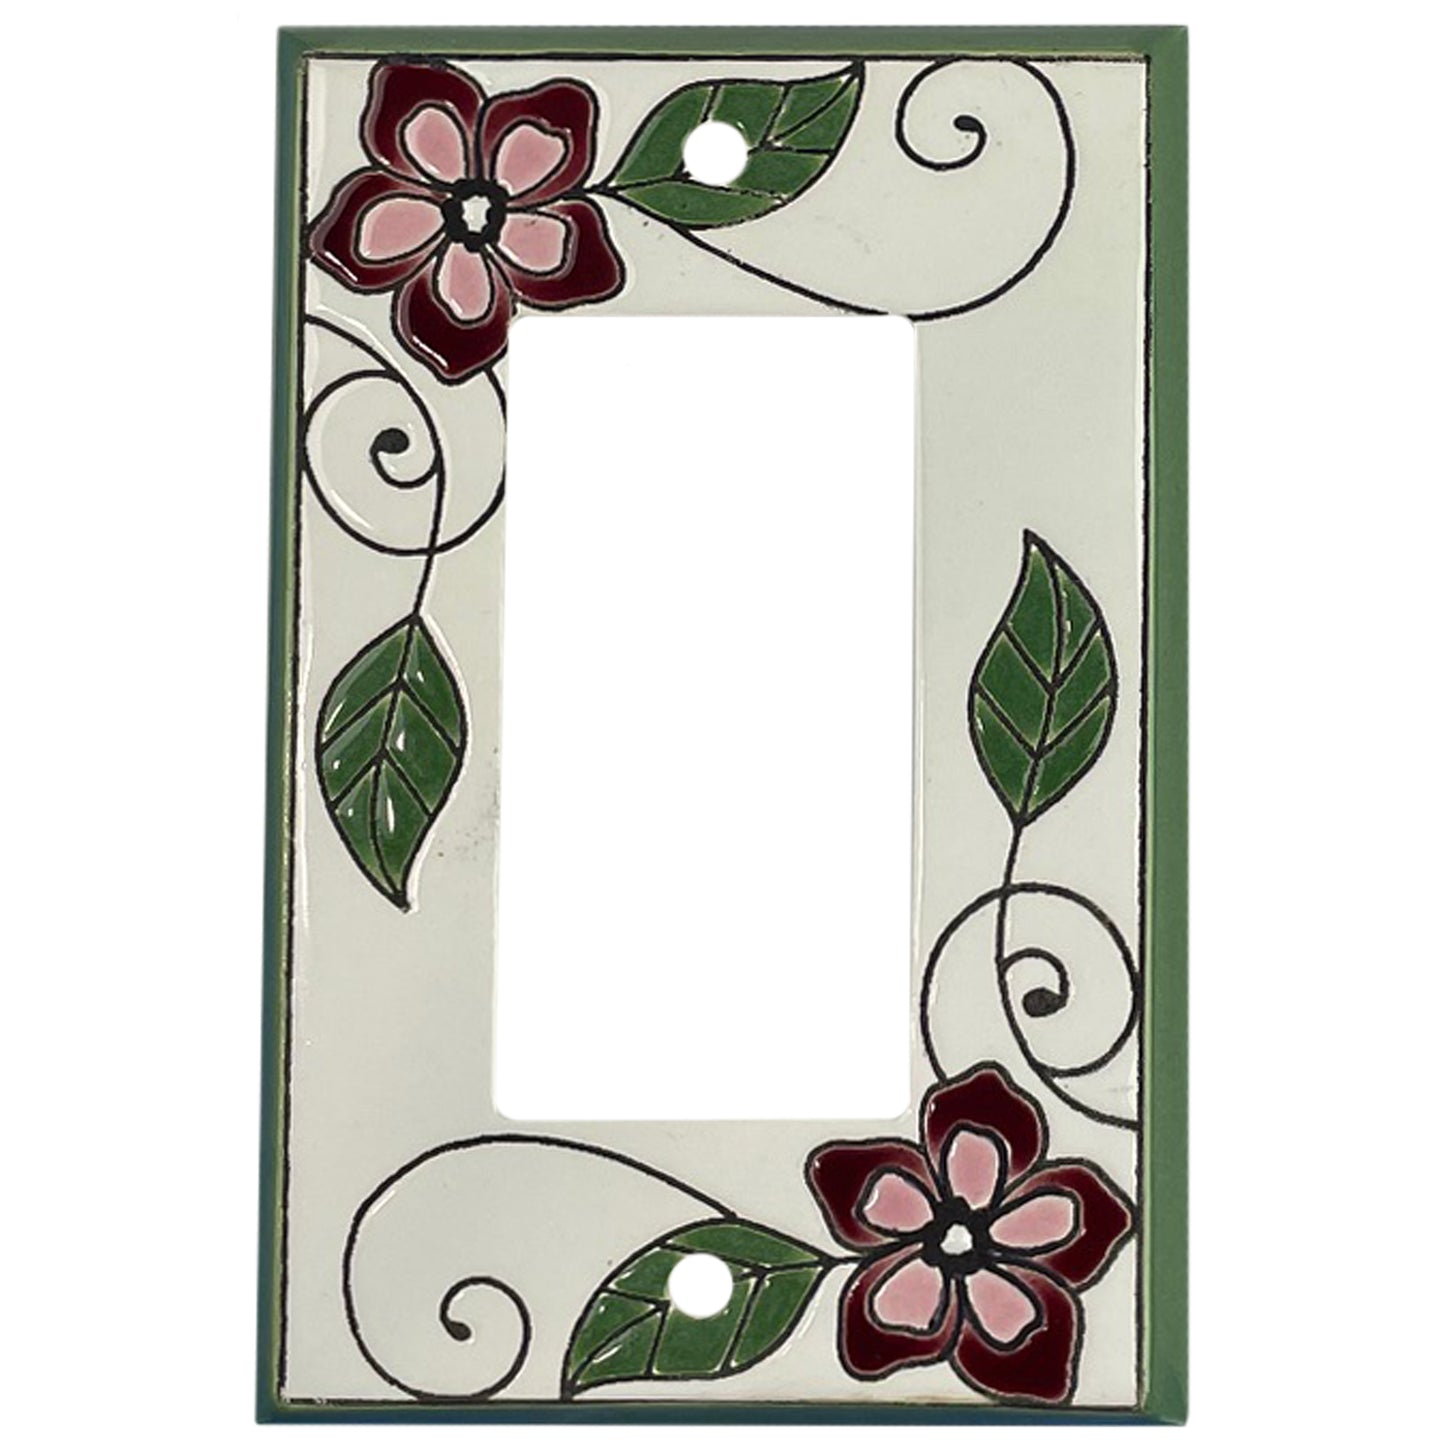 Red Blossoms Single Covers Plates Rocker Wallplate